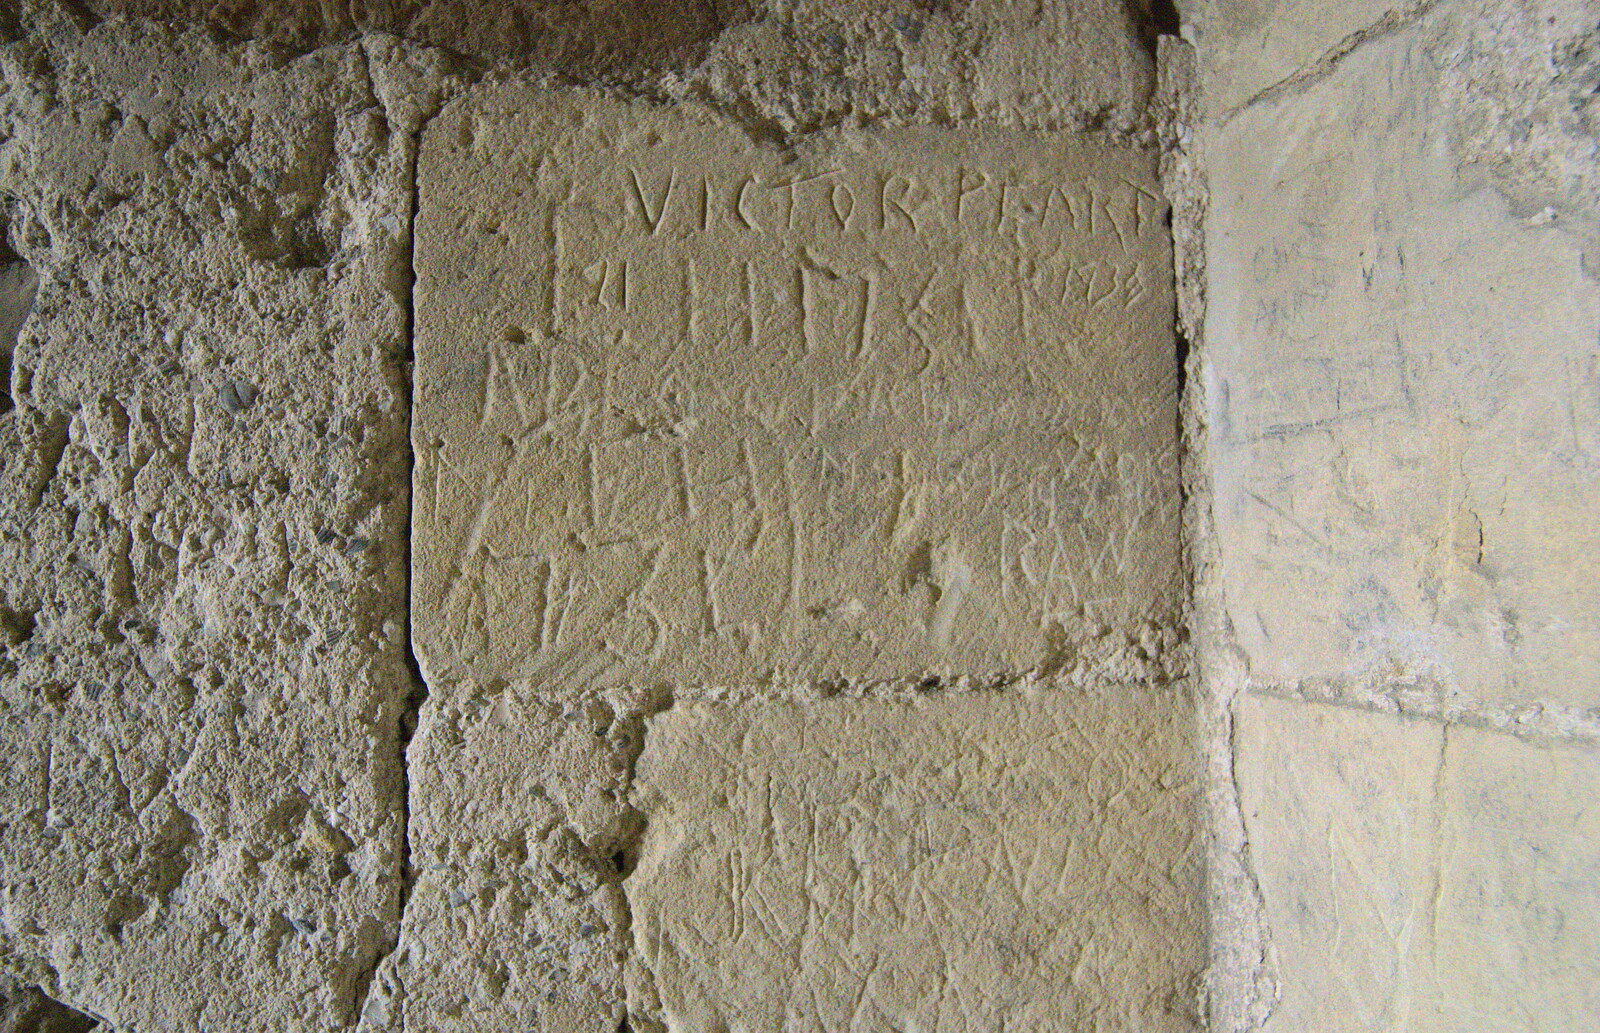 1734 graffiti in a stone at Orford Castle from A Trip to Orford Castle, Orford, Suffolk - 2nd March 2014